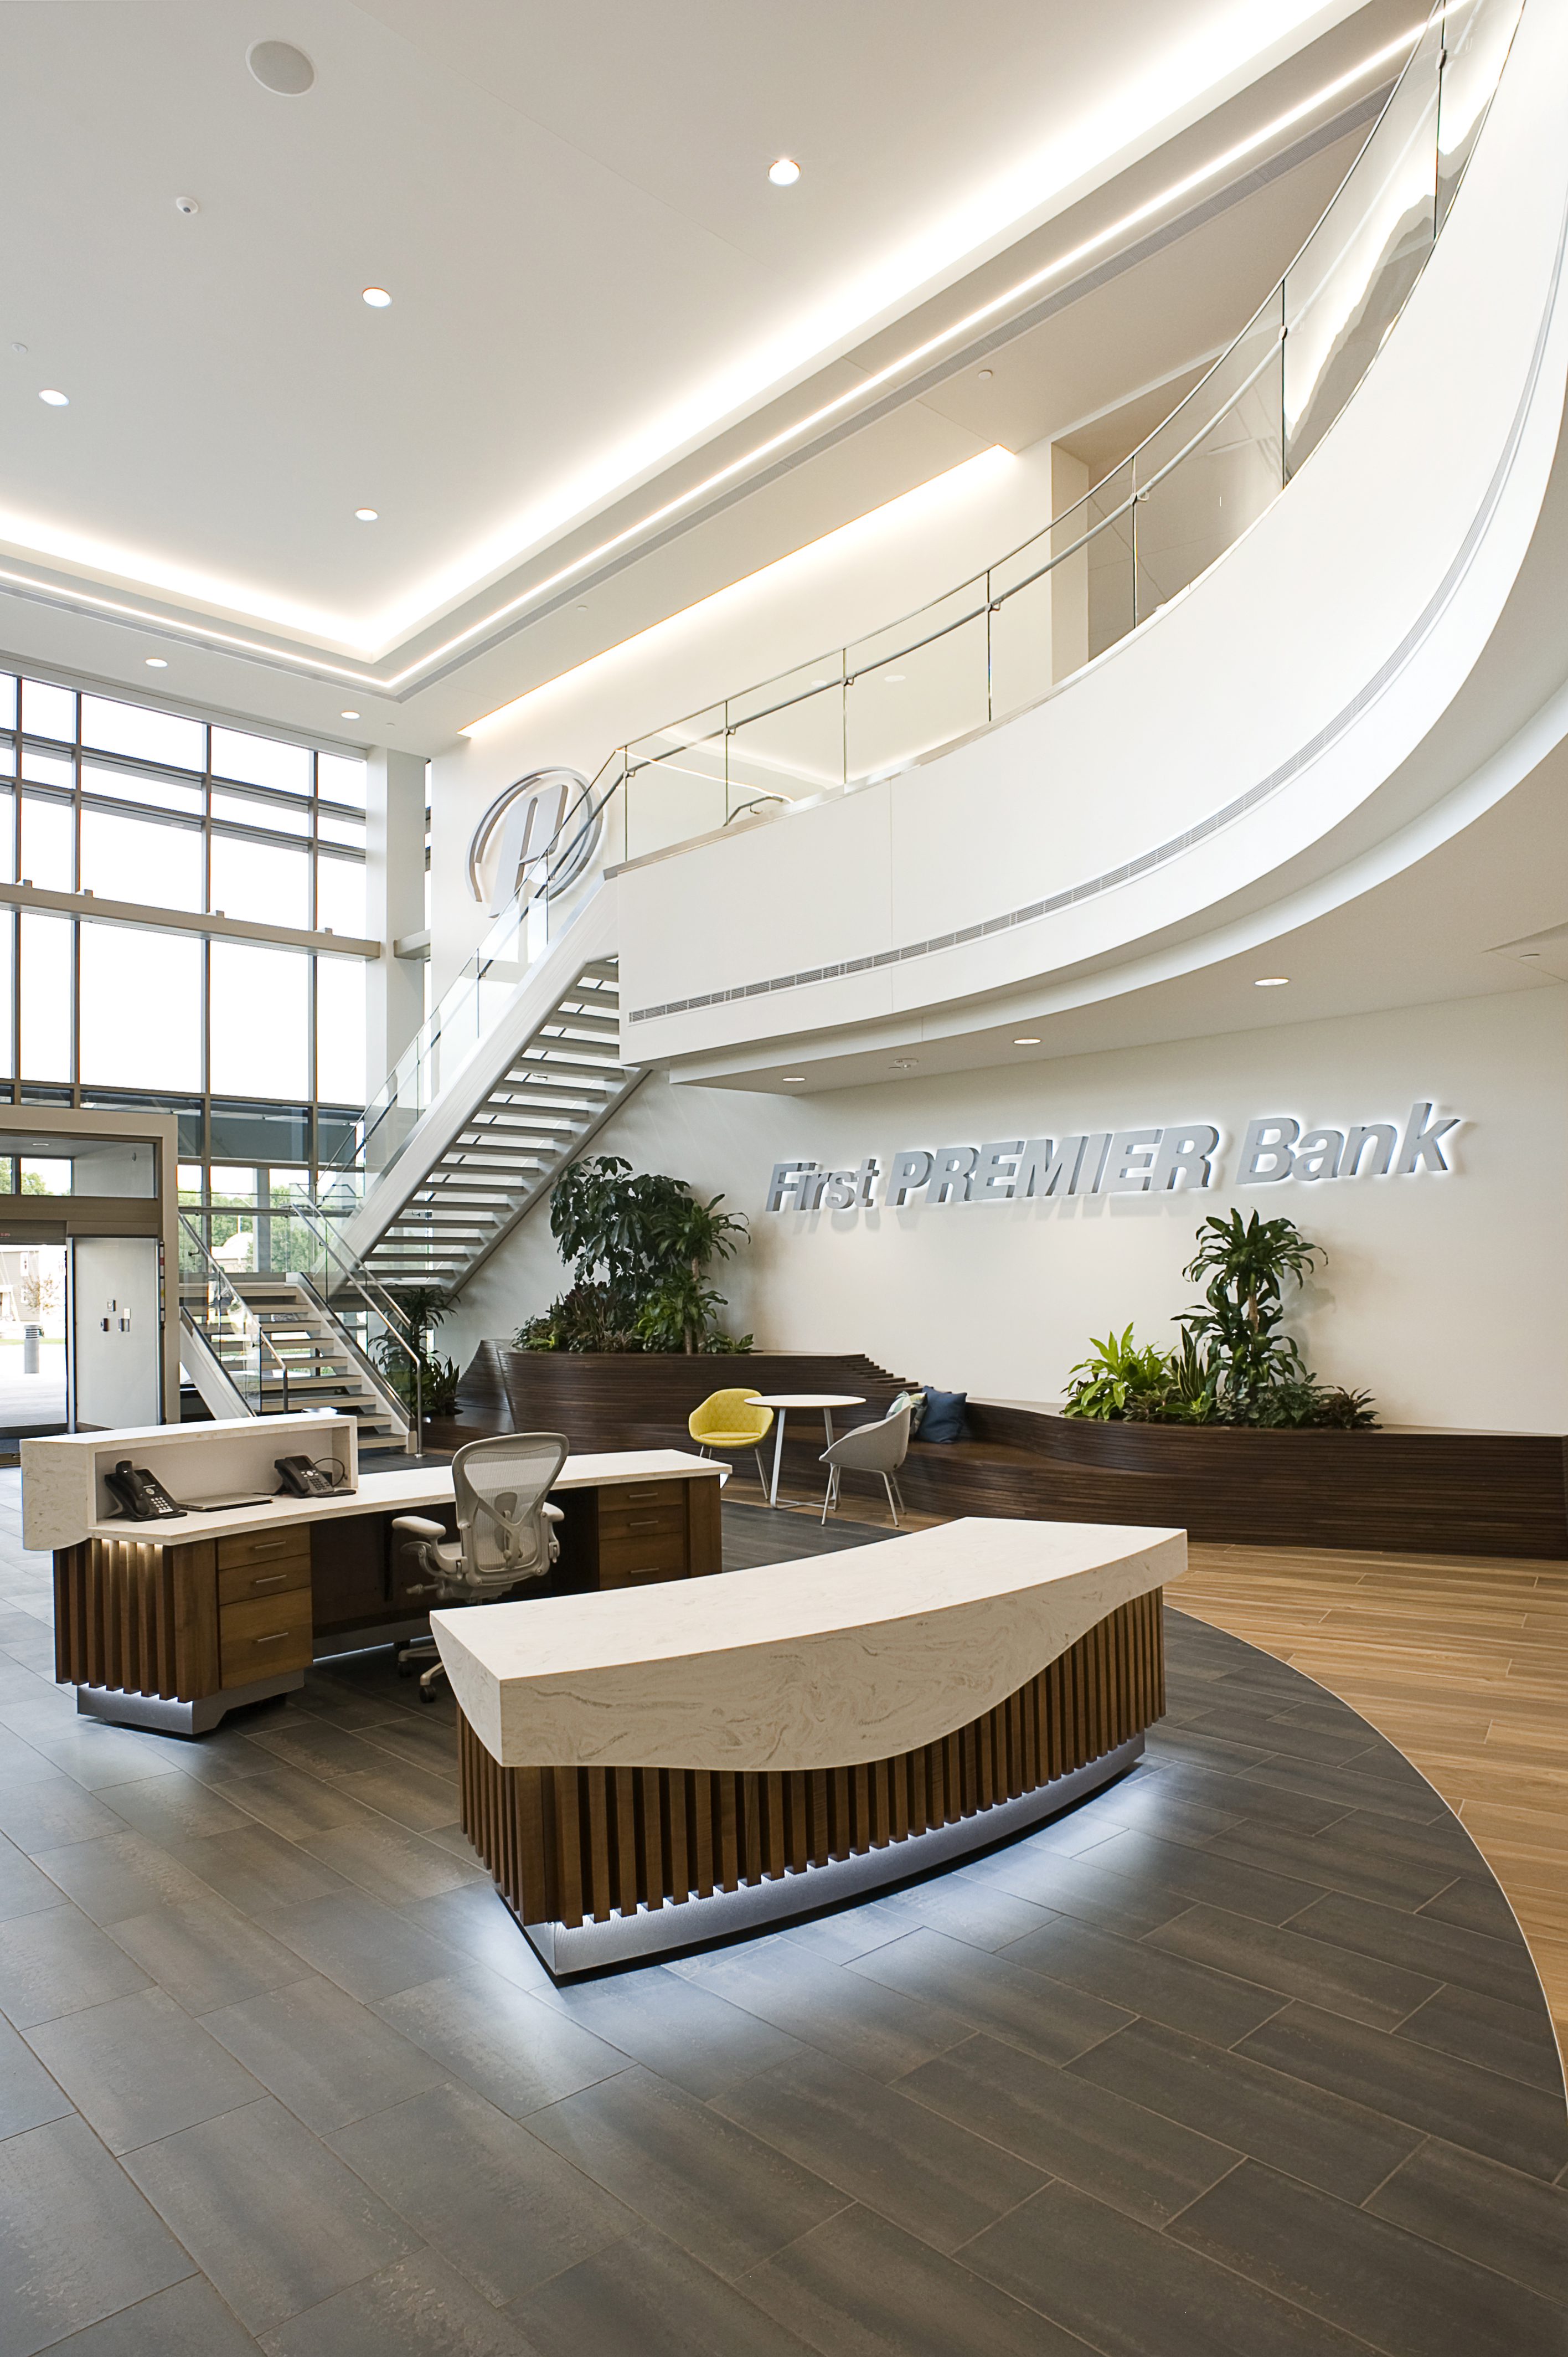 First Premier Bank Headquarters